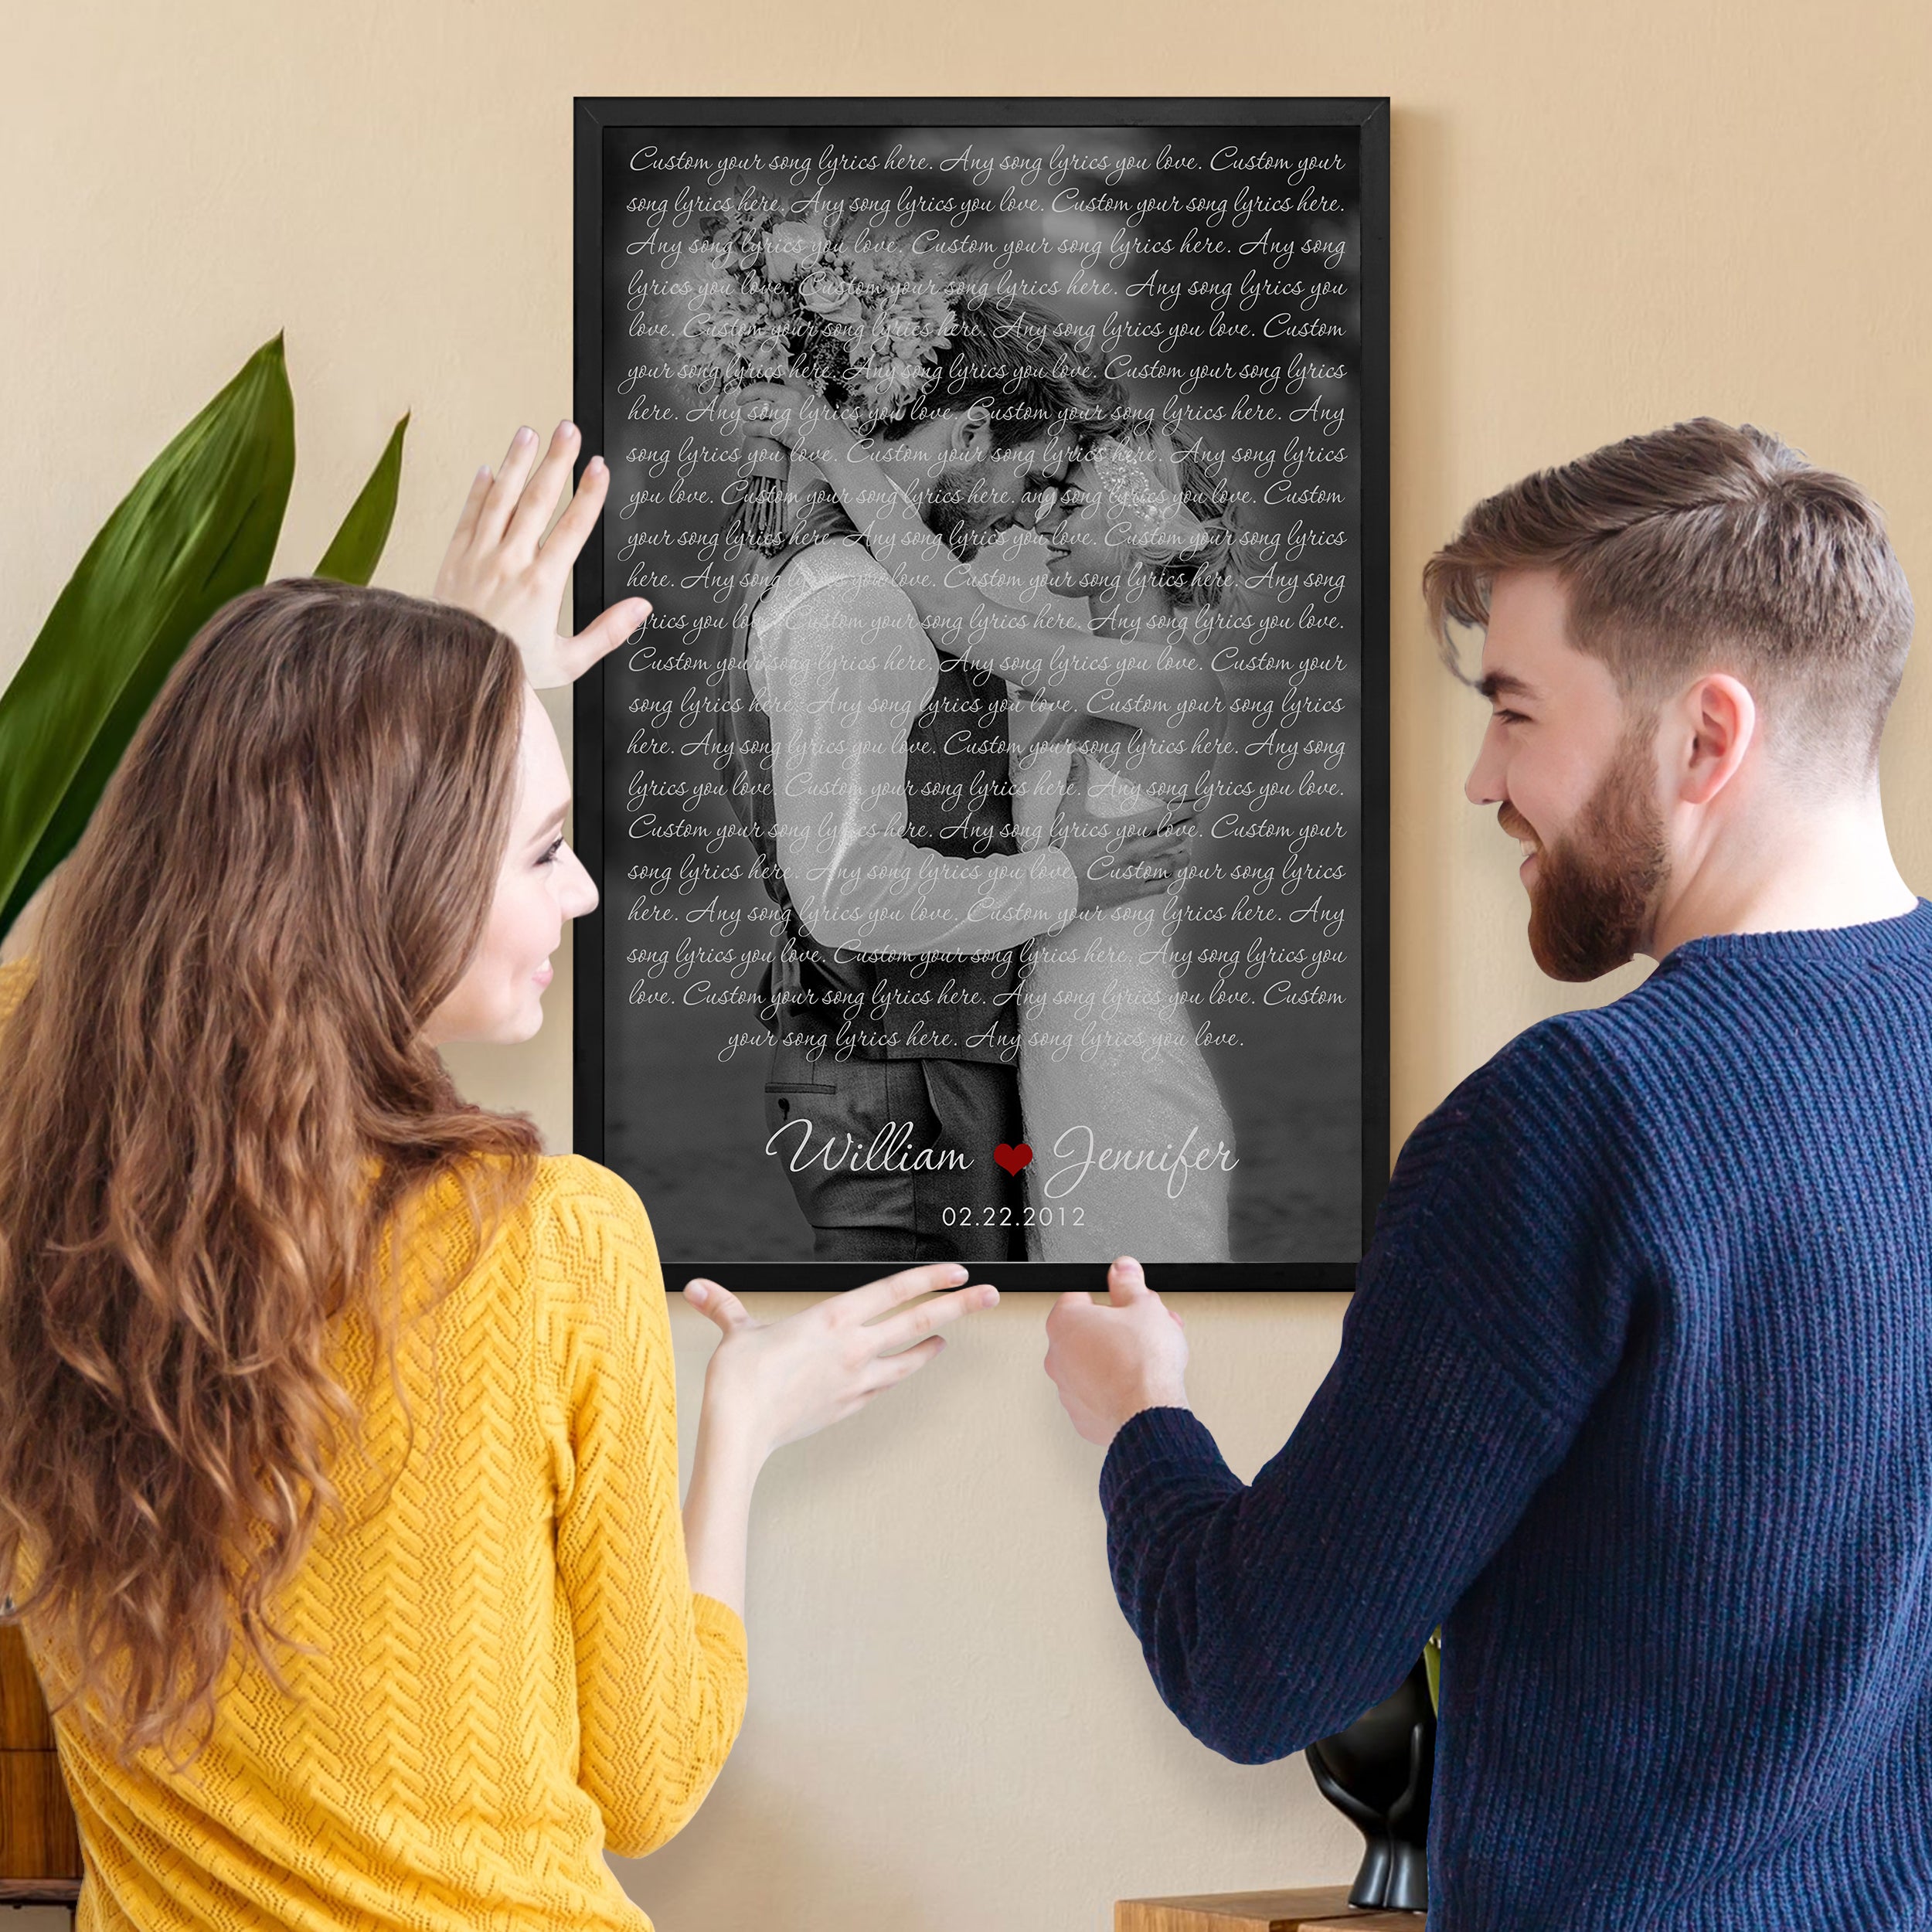 Personalized Gifts for Him - Custom Song Lyrics Poster Photo Couples Gifts First Dance Song Anniversary for Her, Customized Canvas Framed Photo Picture Gifts for Him Cool Things for Your Room